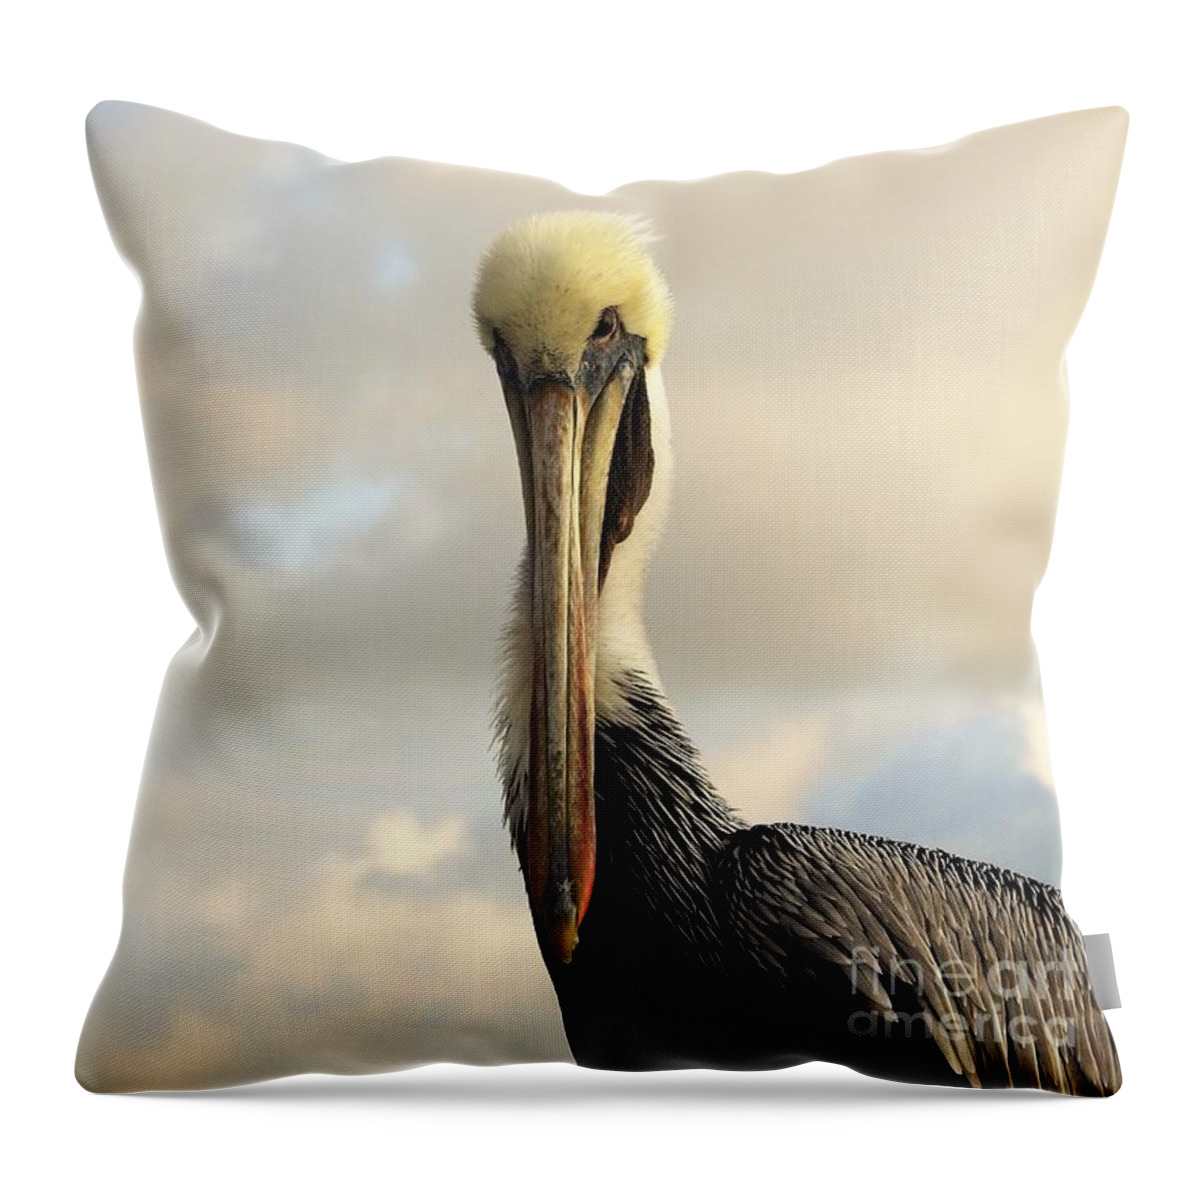 Pelican Throw Pillow featuring the photograph A Pelican's Portrait by Jan Gelders